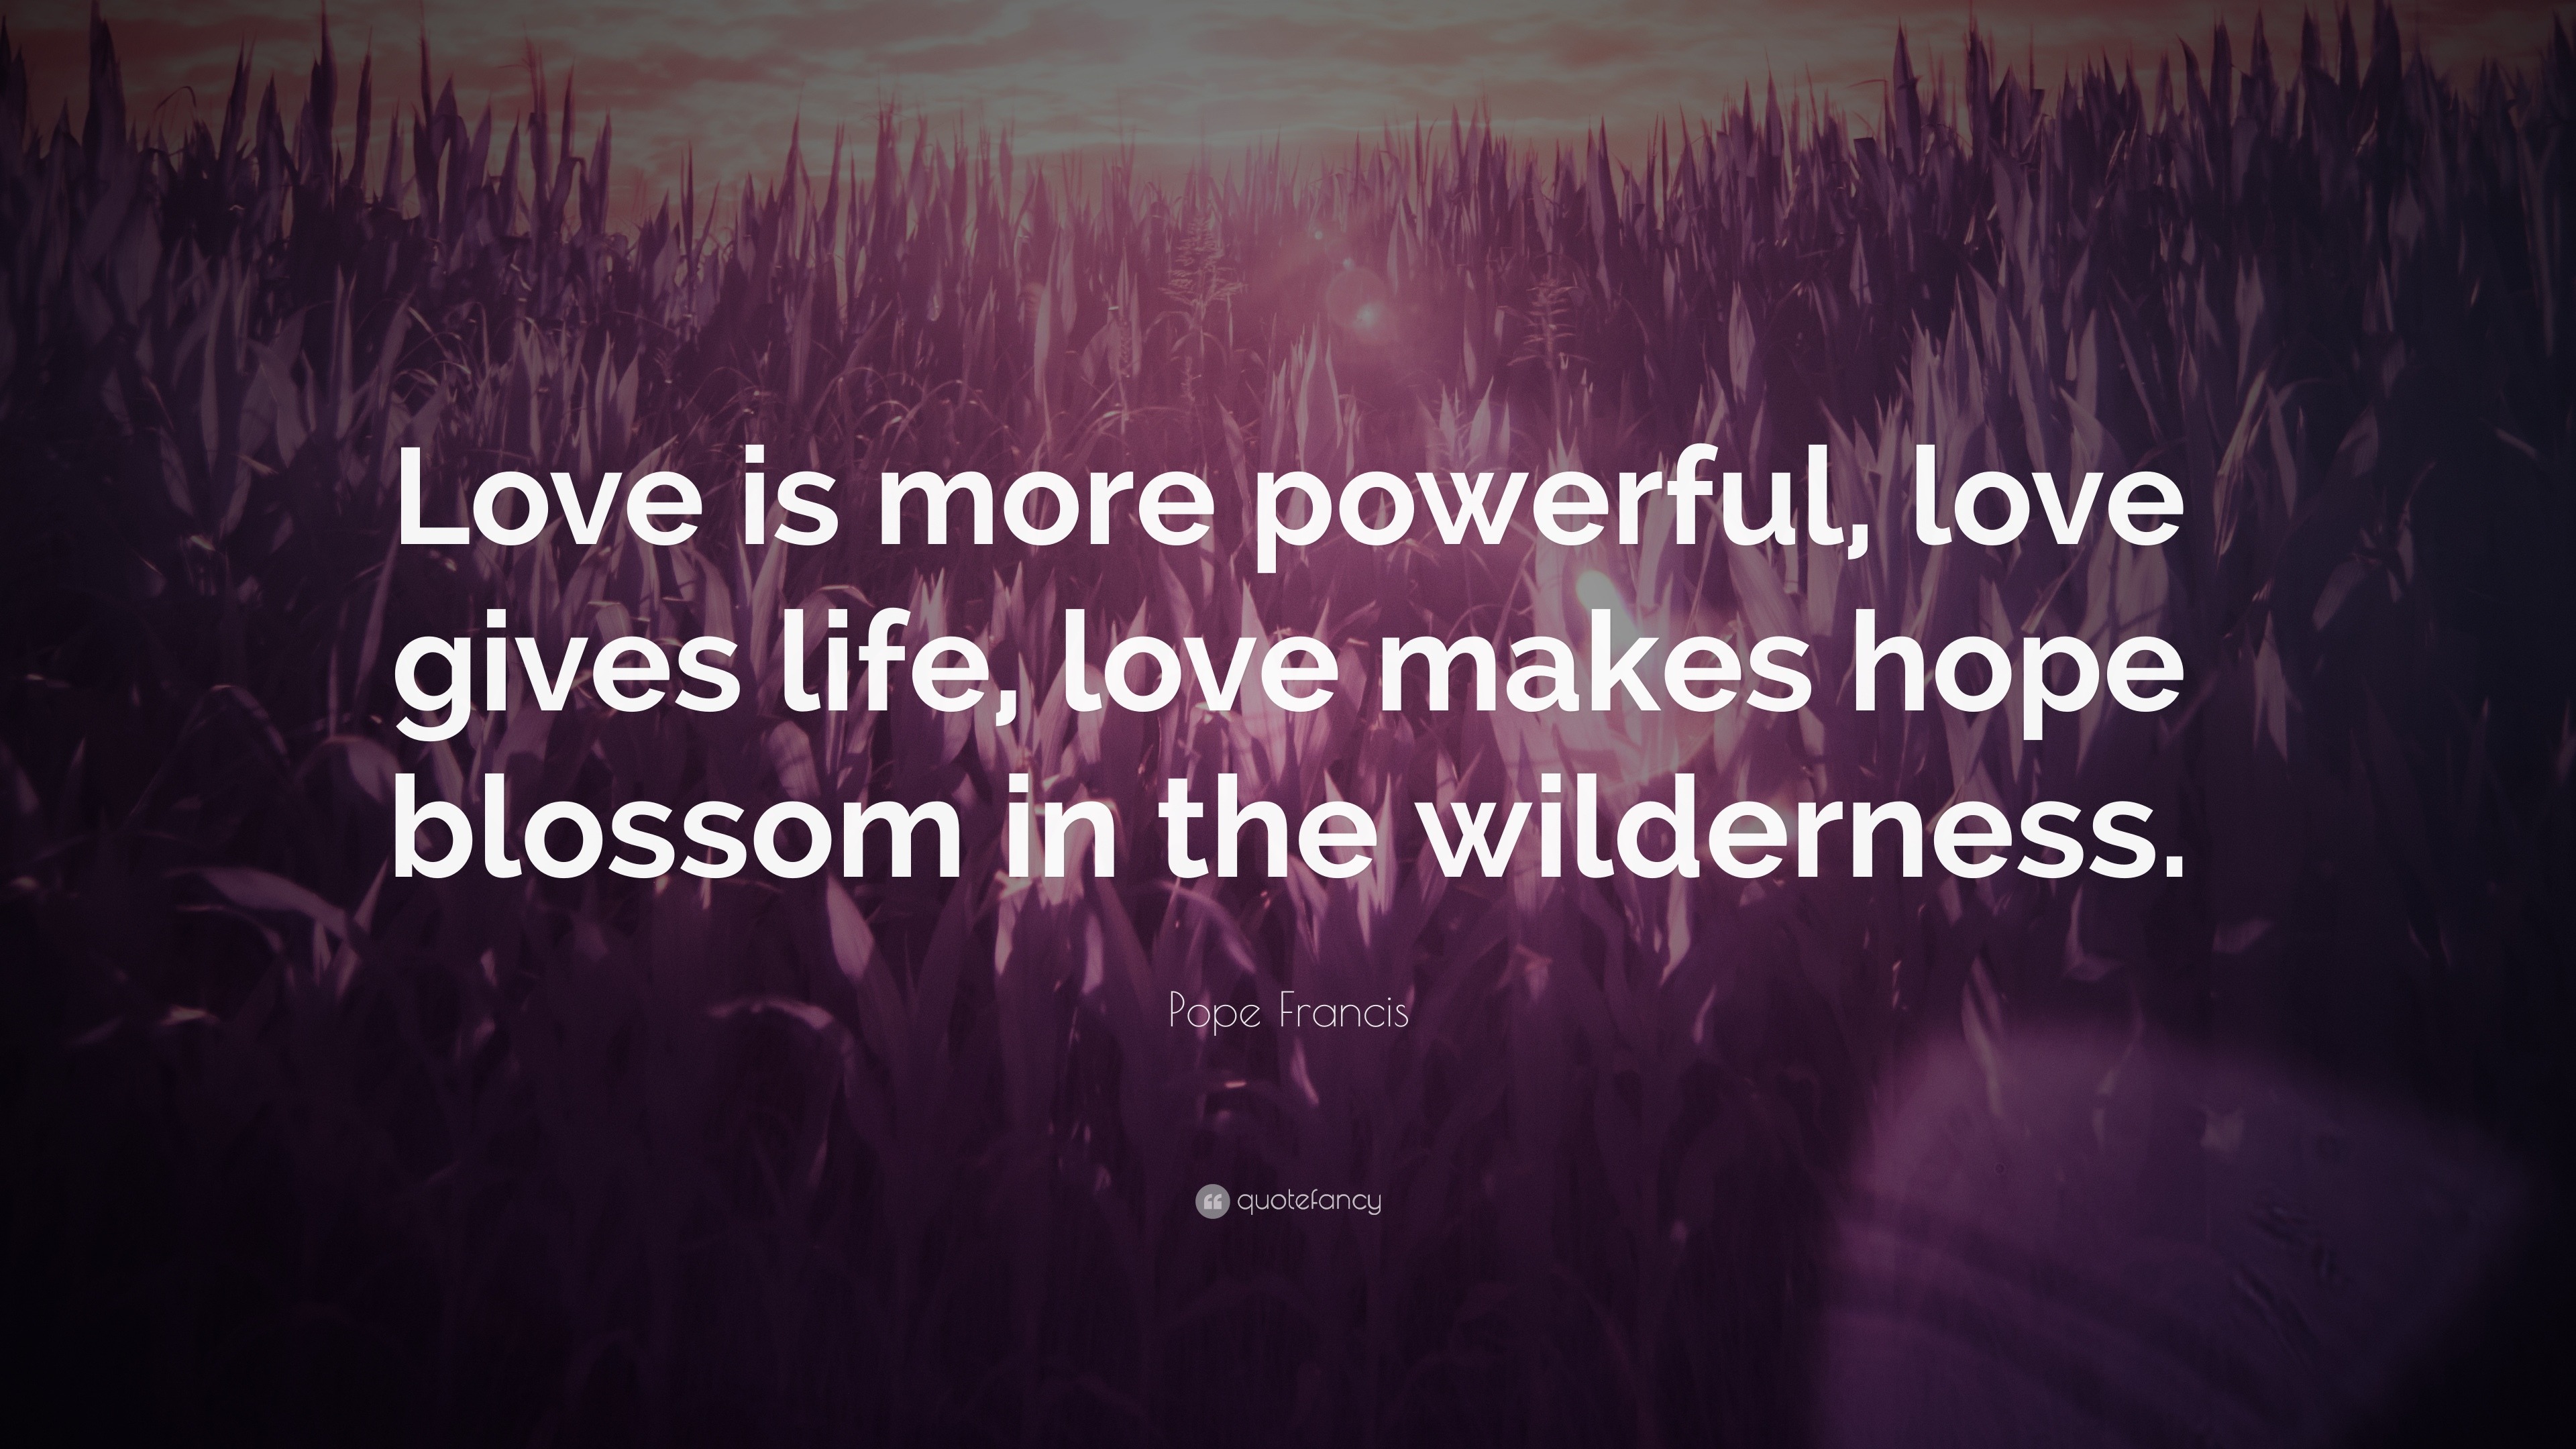 Pope Francis Quote “Love is more powerful love gives life love makes